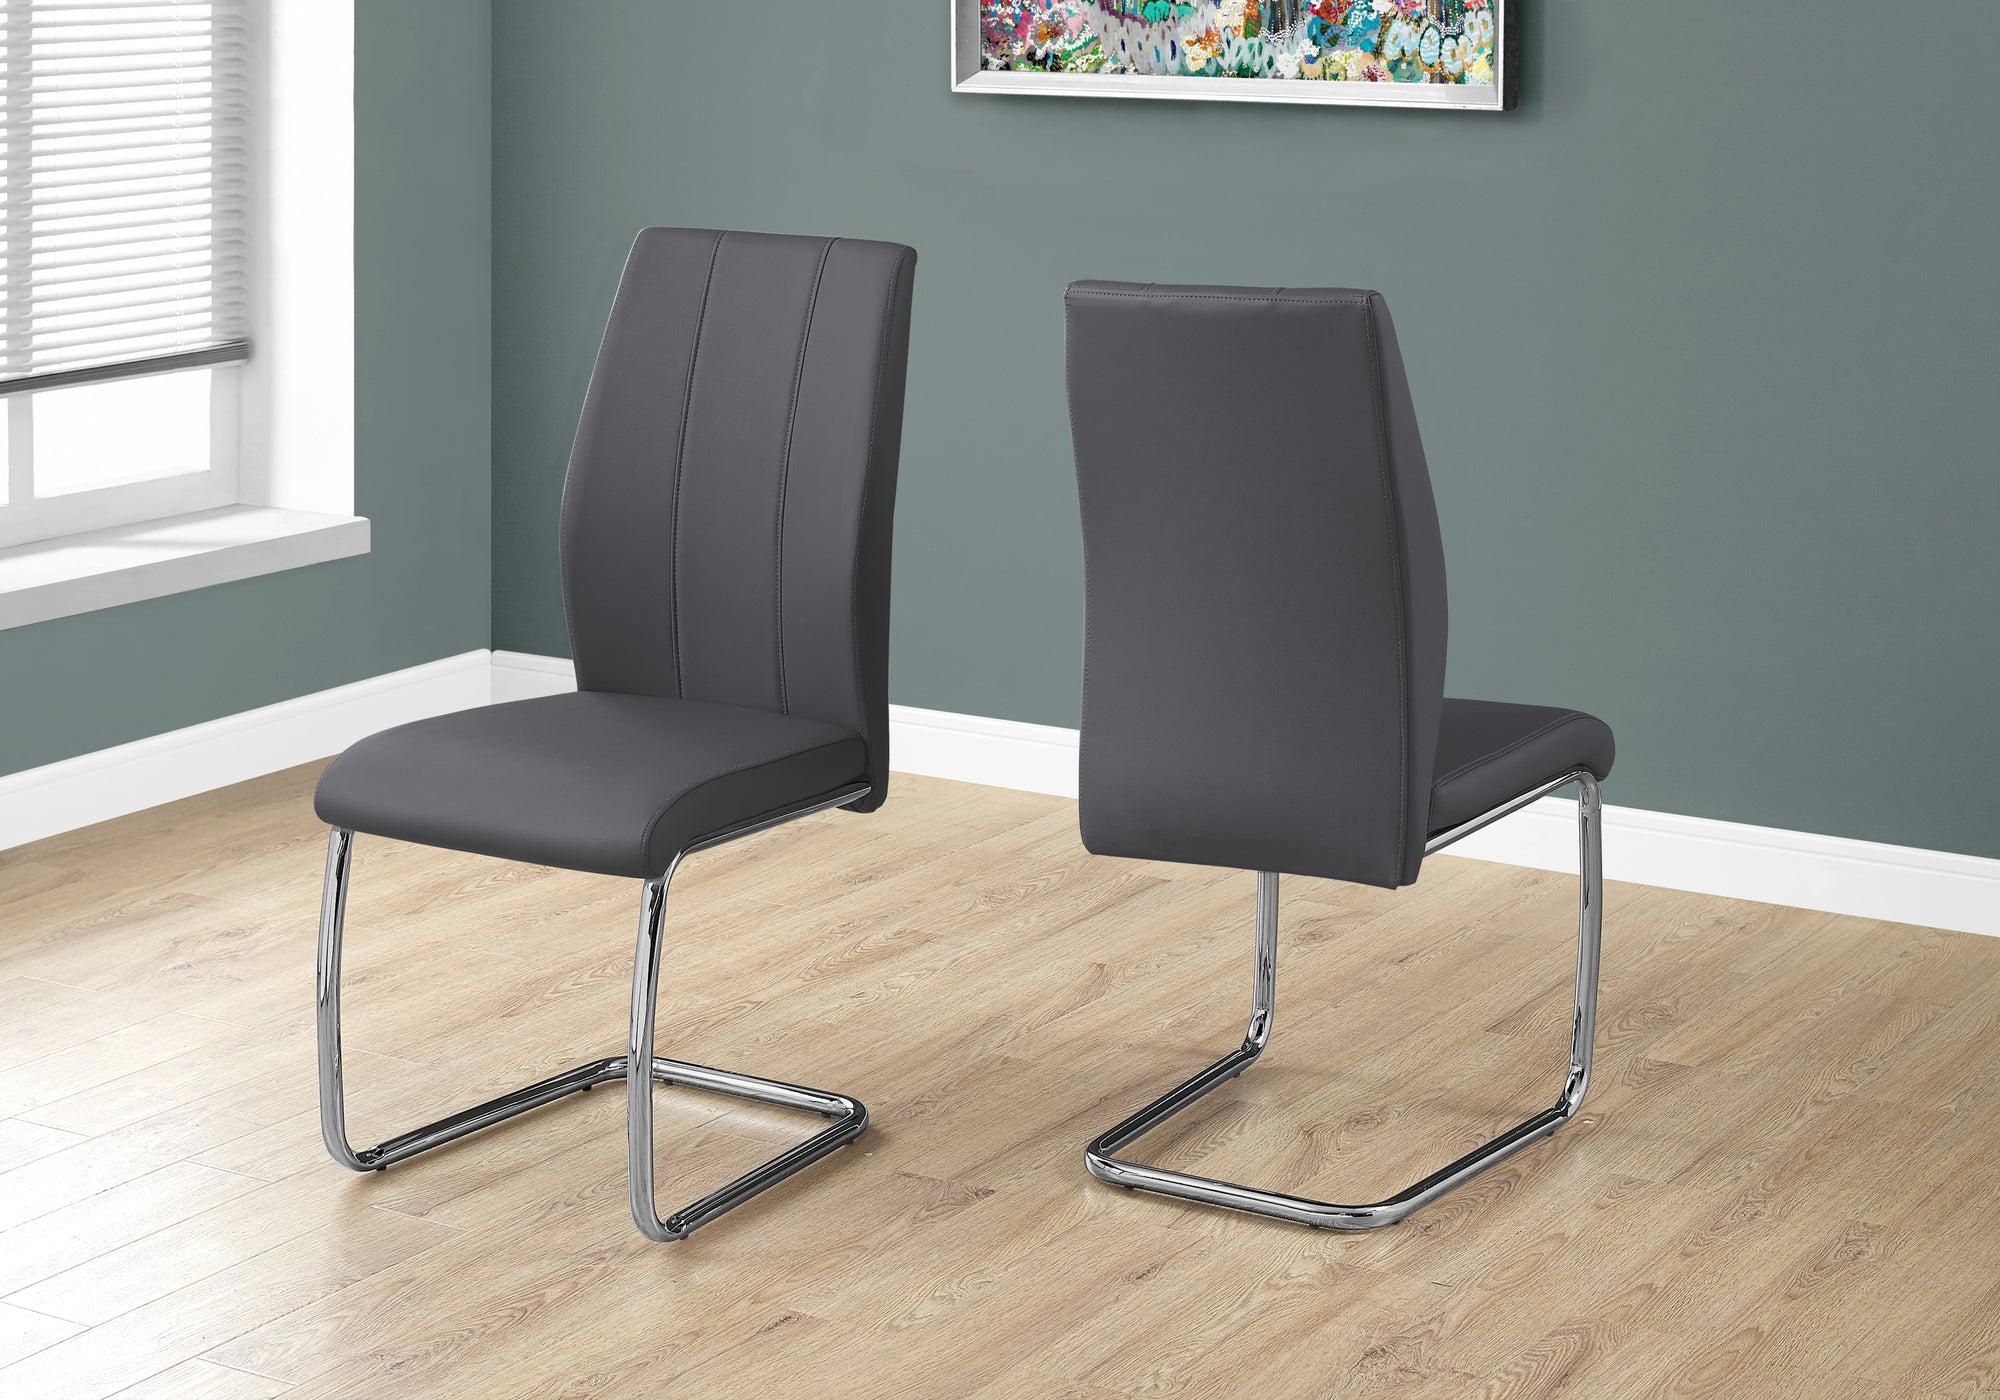 MN-411077    Dining Chair, Set Of 2, Side, Pu Leather-Look, Upholstered, Metal Legs, Kitchen, Dining Room, Velvet, Metal Legs, Grey, Chrome, Contemporary, Modern